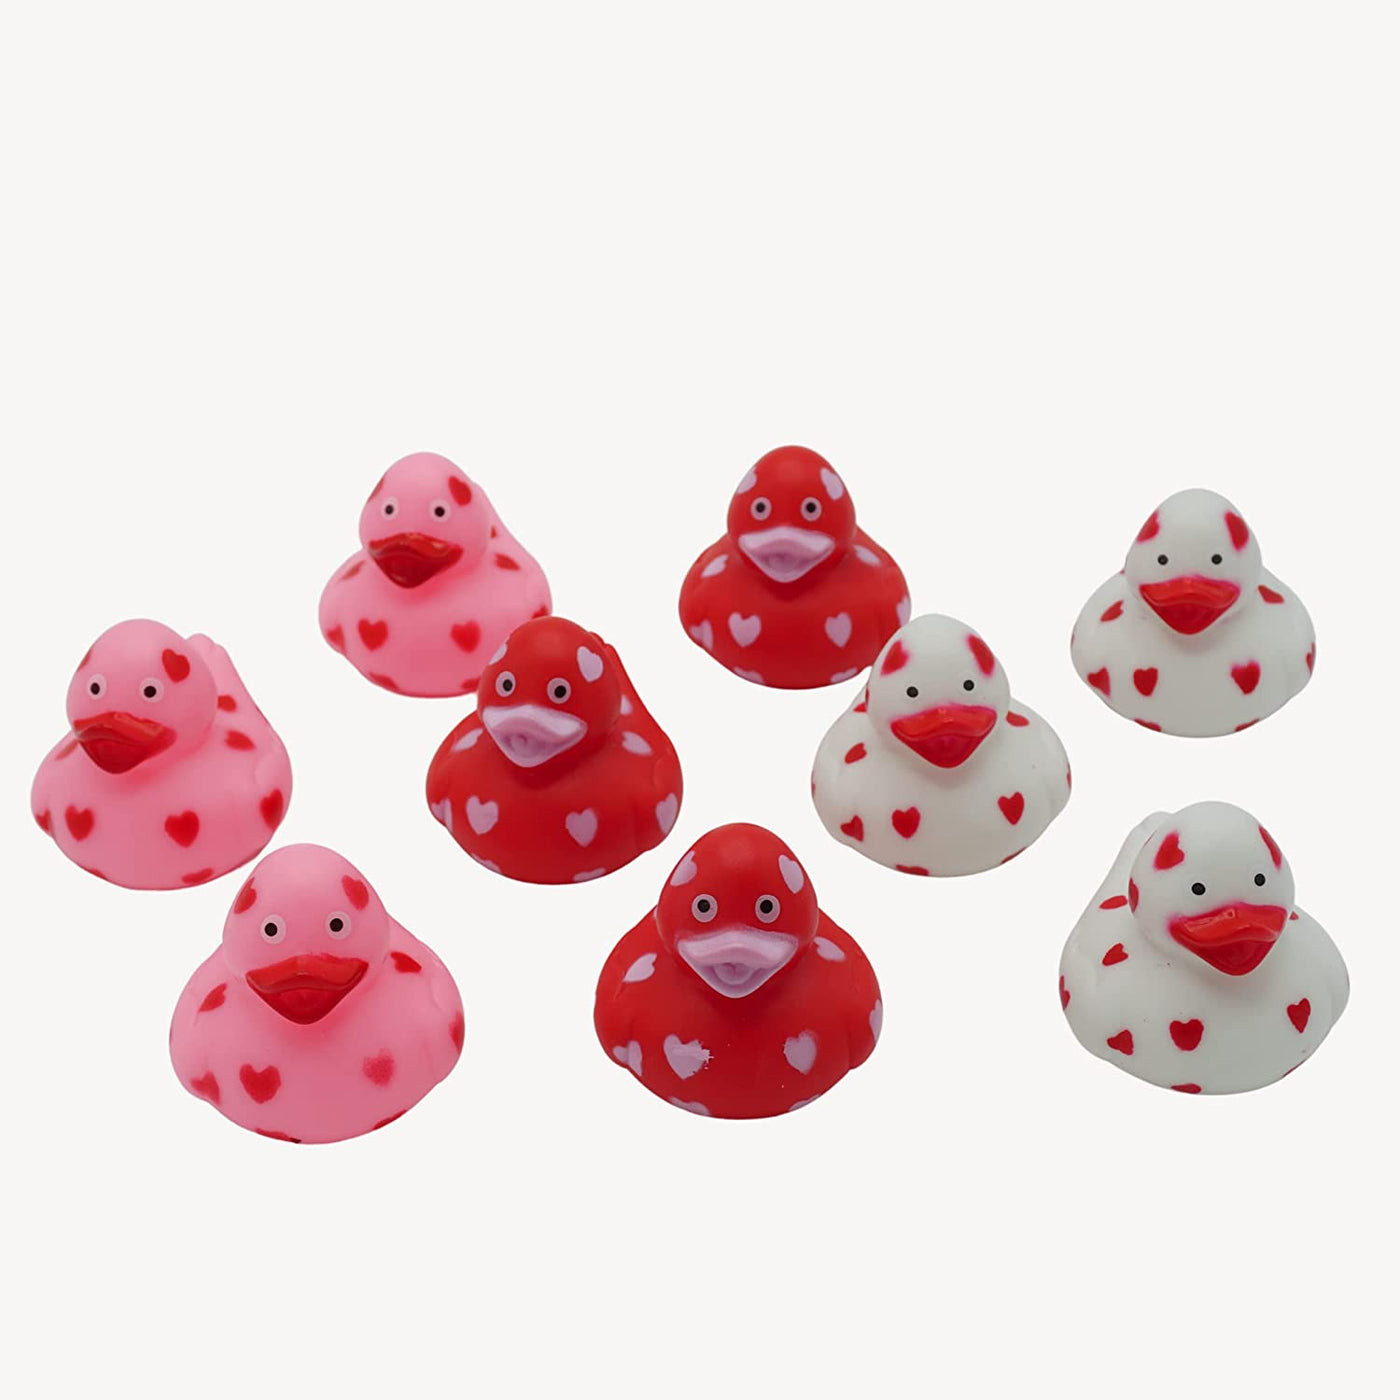 4E's Novelty Valentines Day Rubber Ducks (24 Pack) Heart Themed Duckies, Class Valentines Day Gifts for Kids Bulk, Valentines Day Party Favors Classroom Exchange Prizes for Kids Class